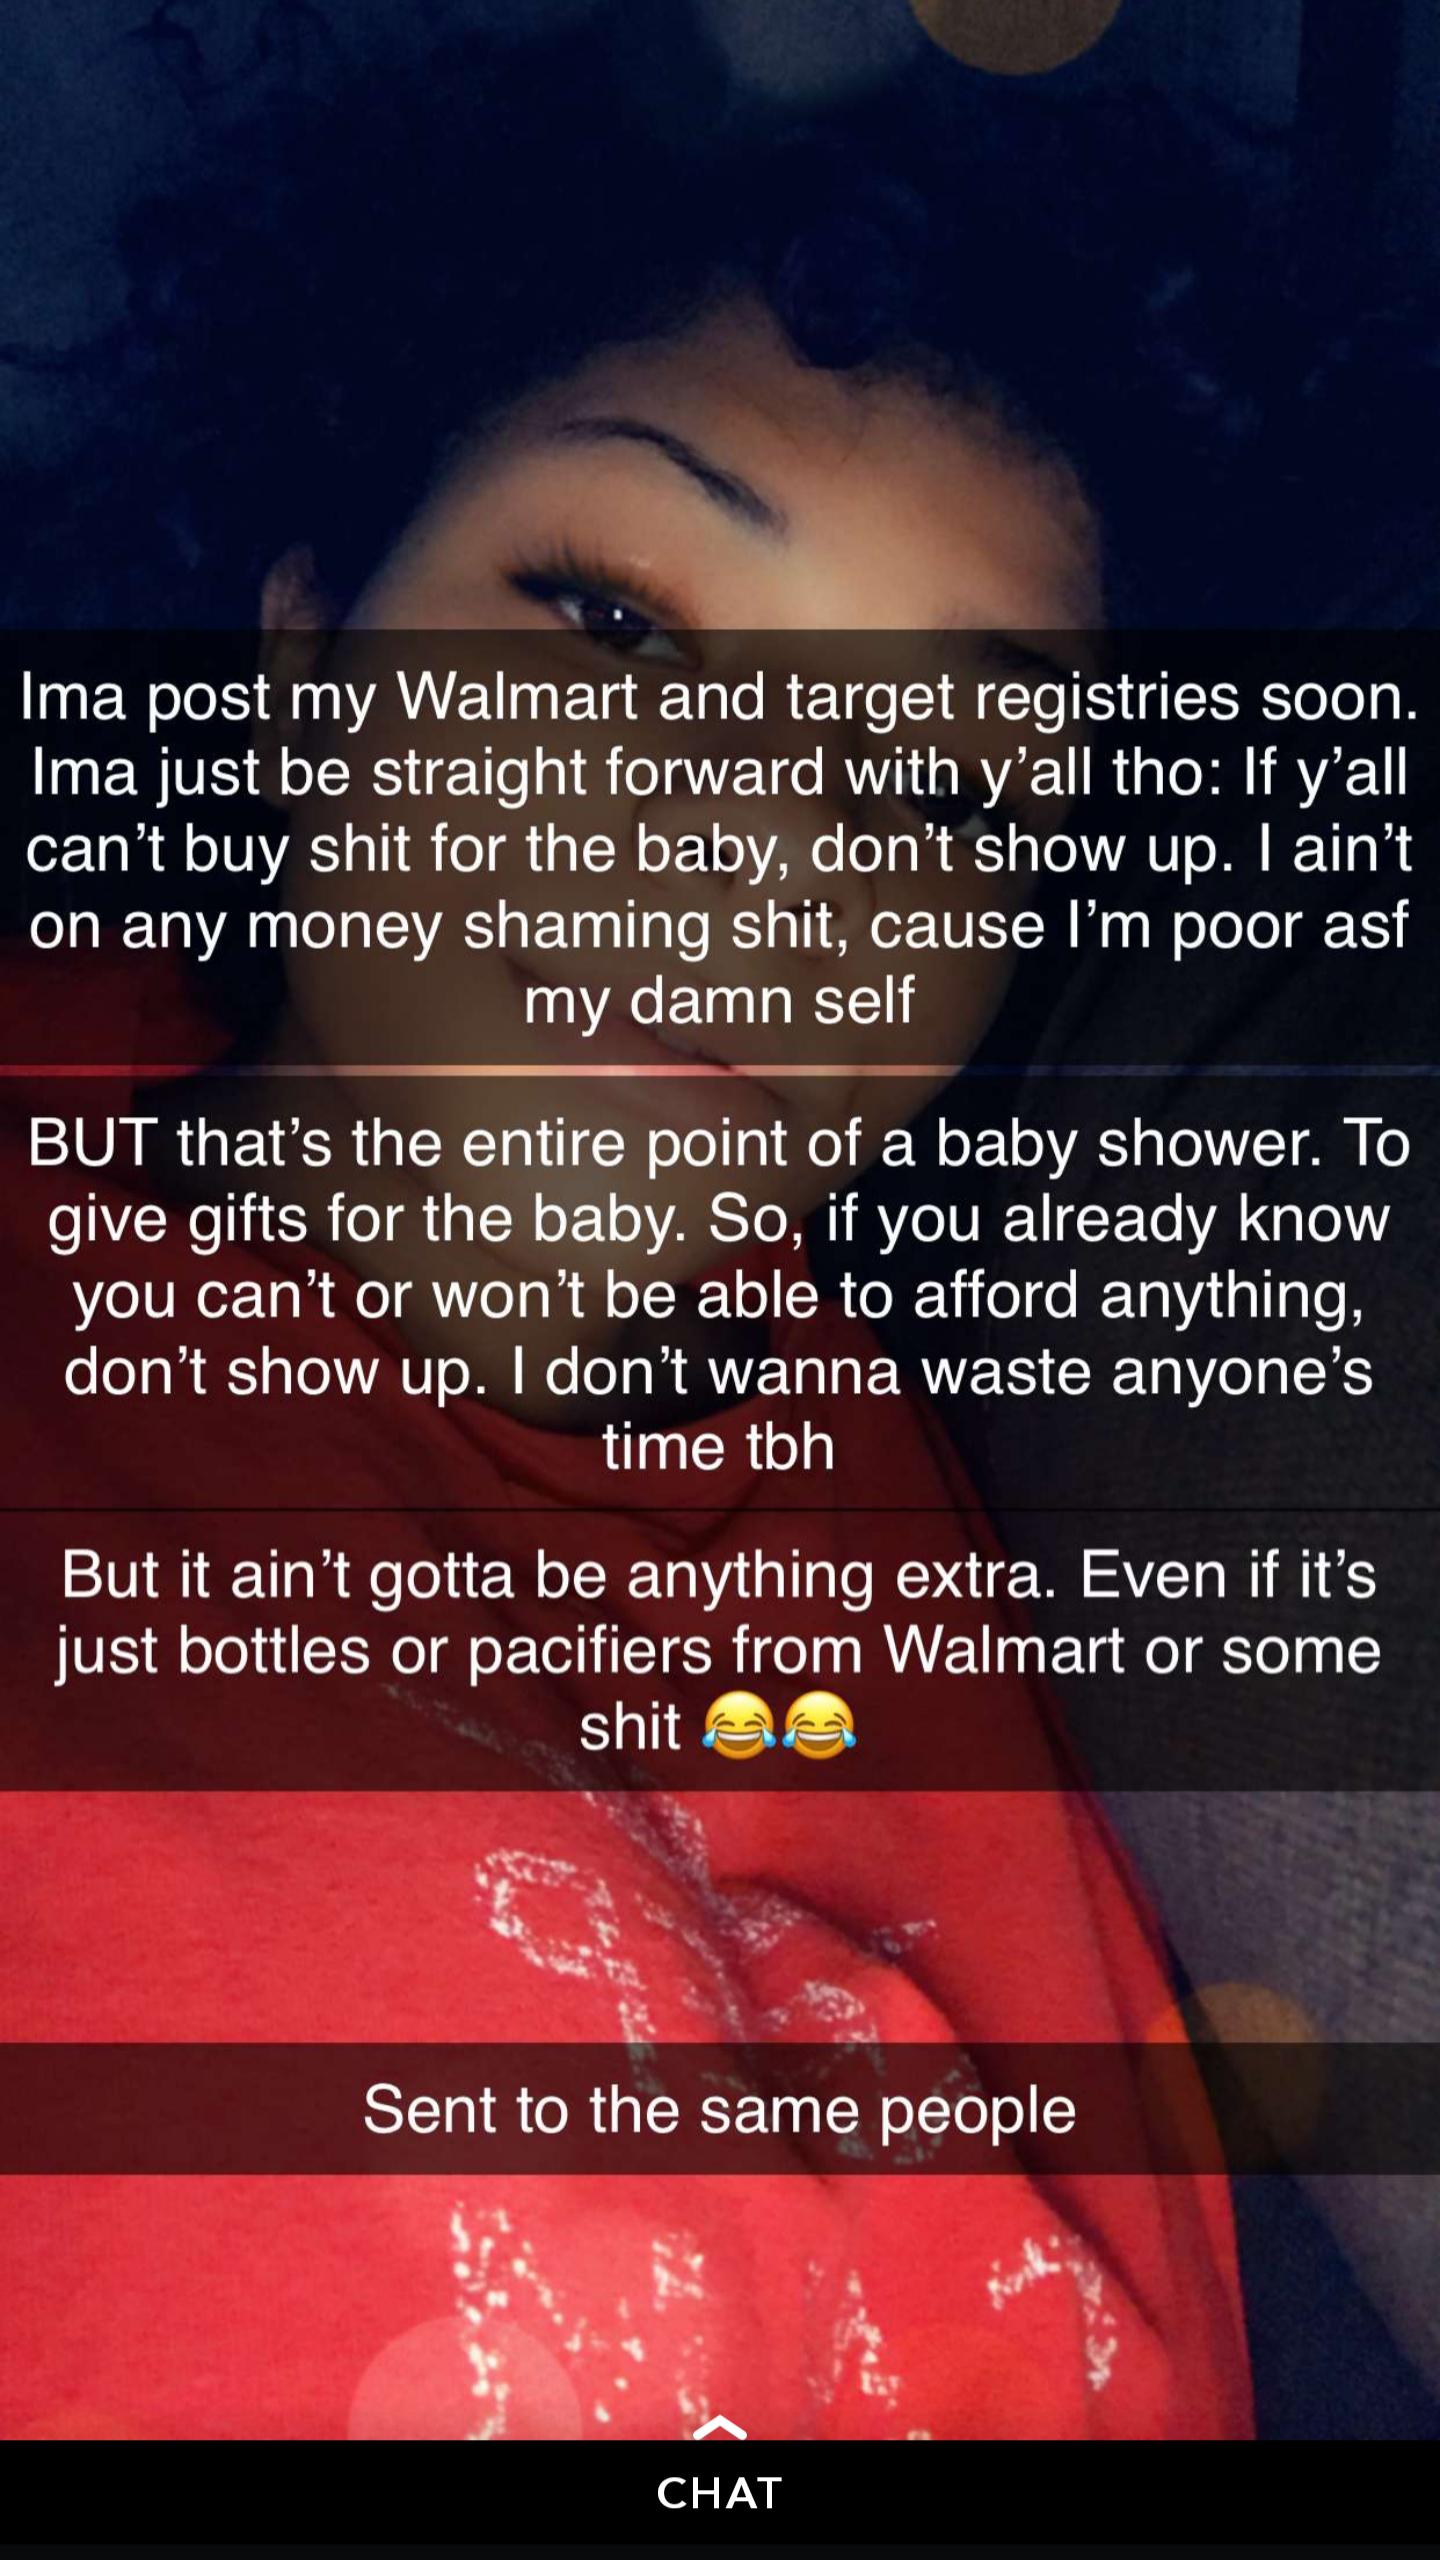 Ima post my Walmart and target registries soon. Ima just be straight forward with y'all tho If y'all can't buy shit for the baby, don't show up. I ain't on any money shaming shit, cause I'm poor asf my damn self But that's the entire point of a baby…